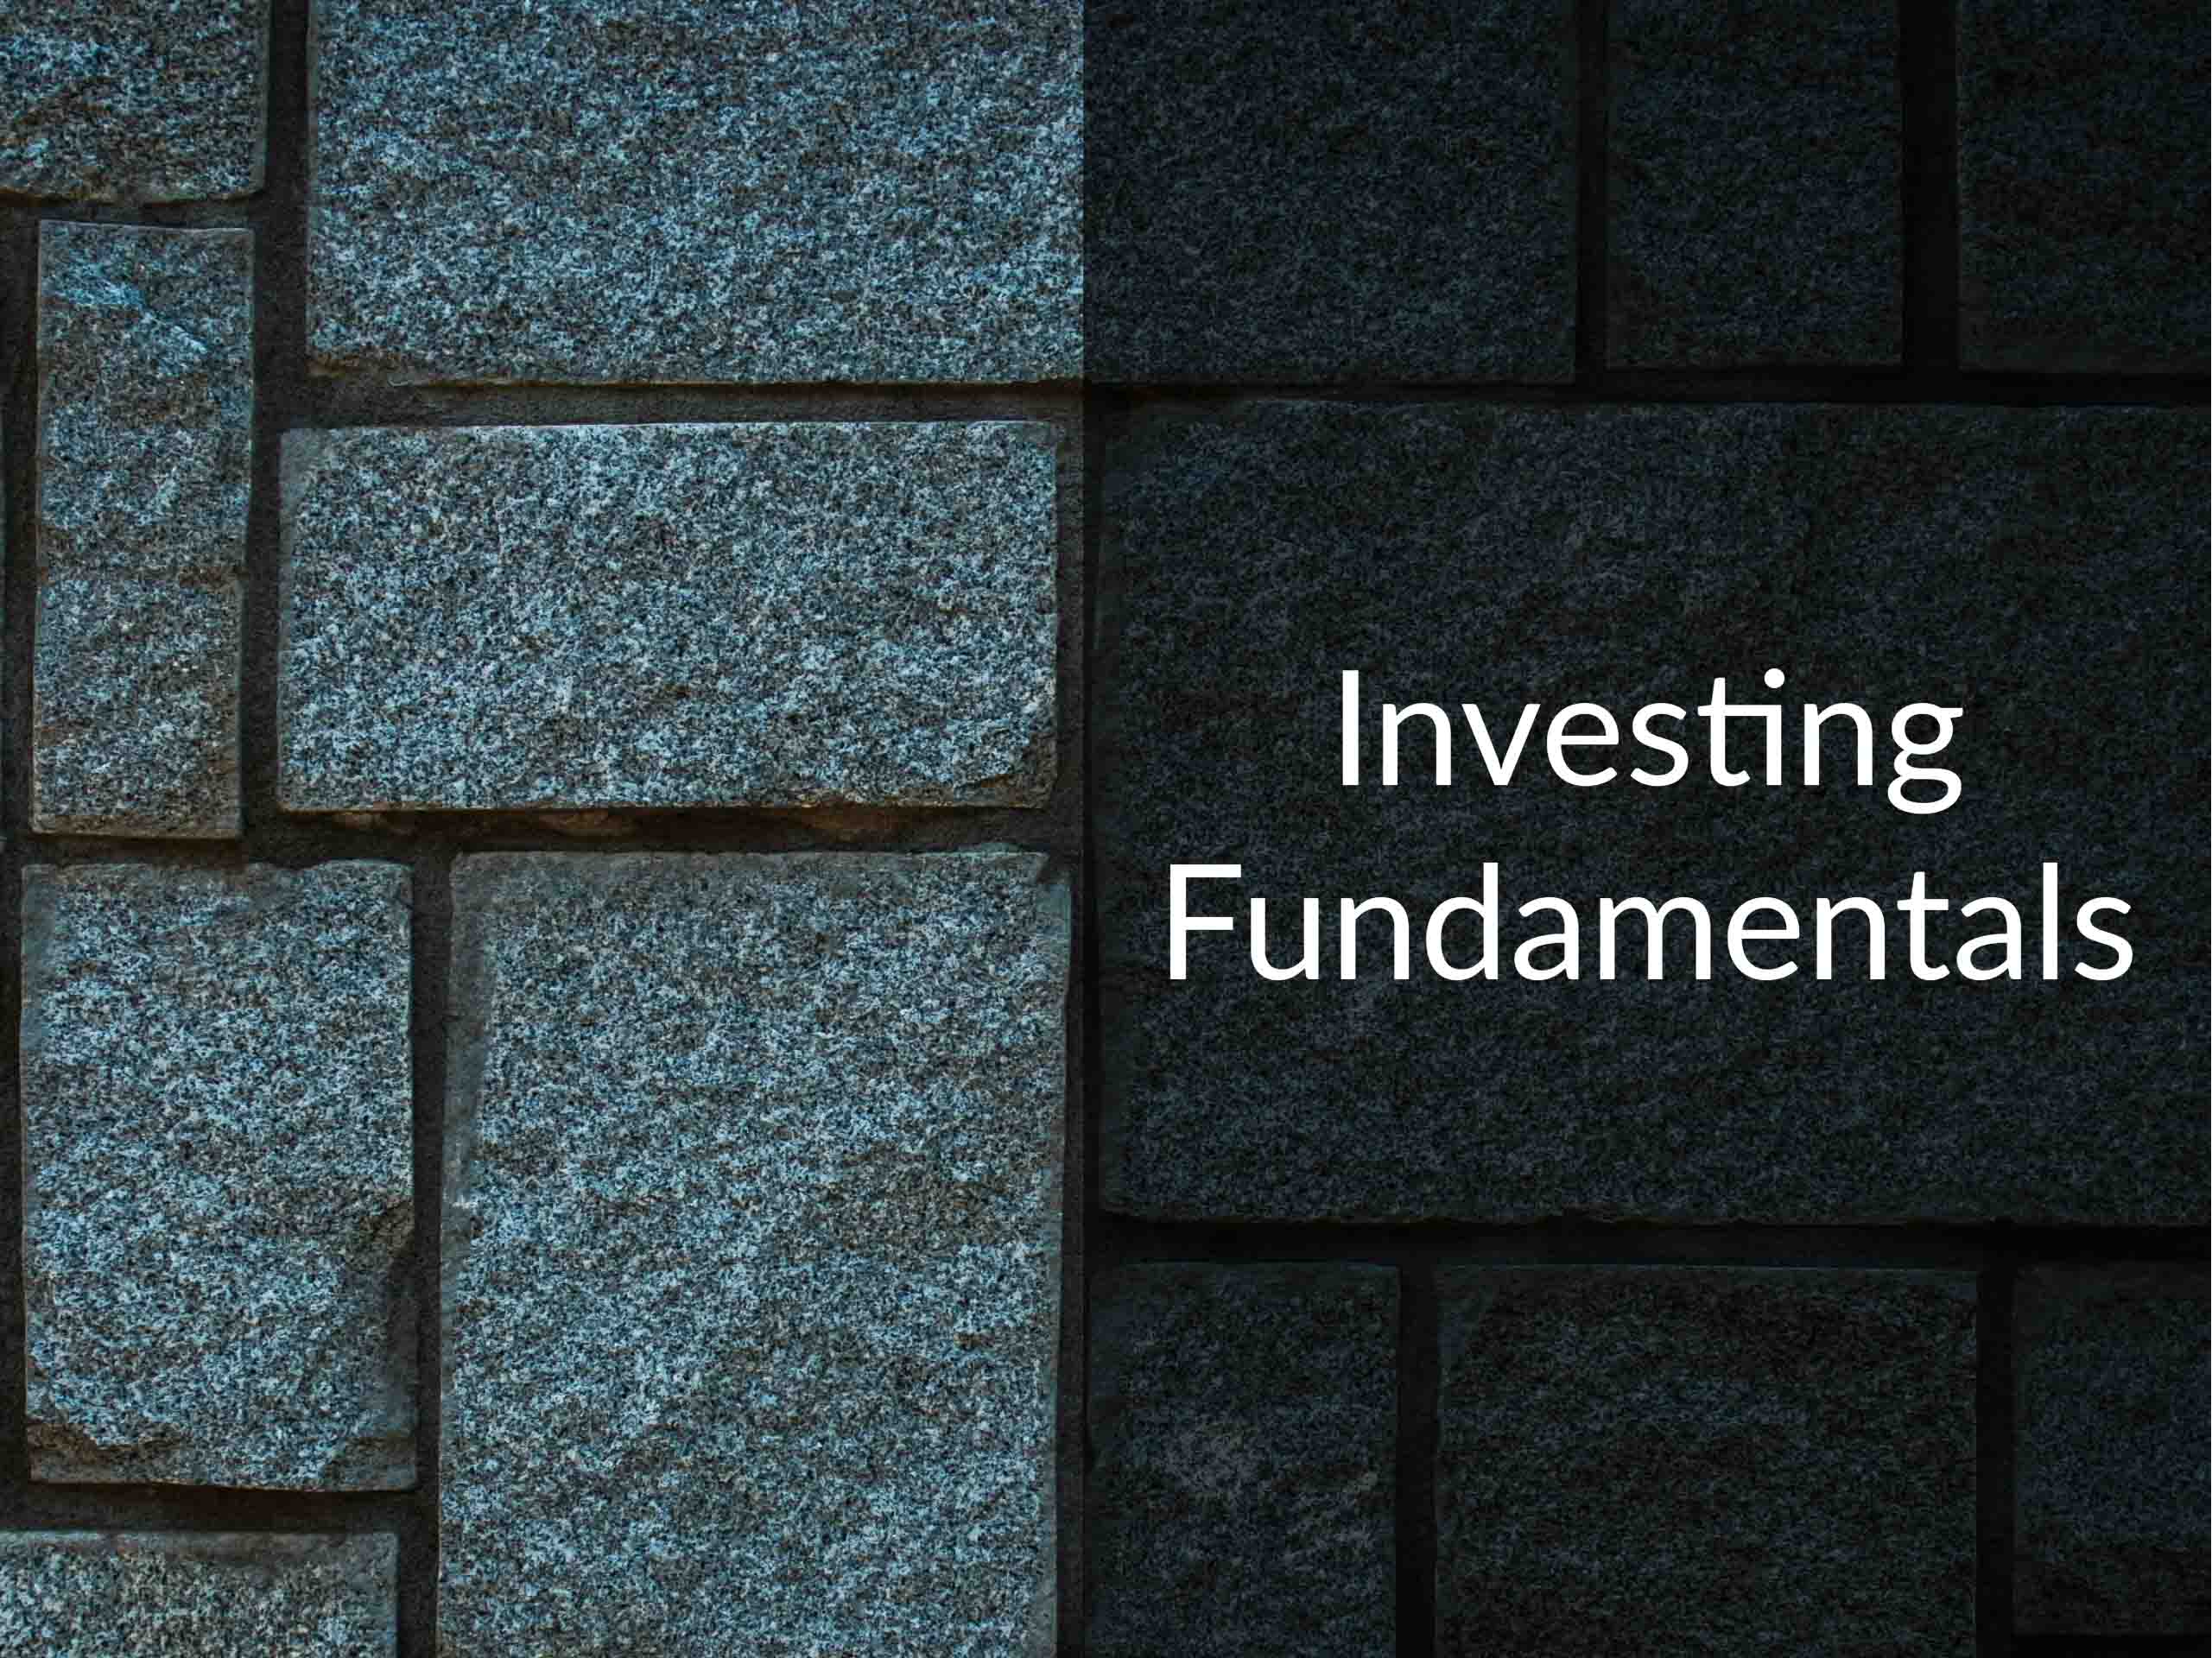 Stone block wall with caption that says "Investing Fundamentals"